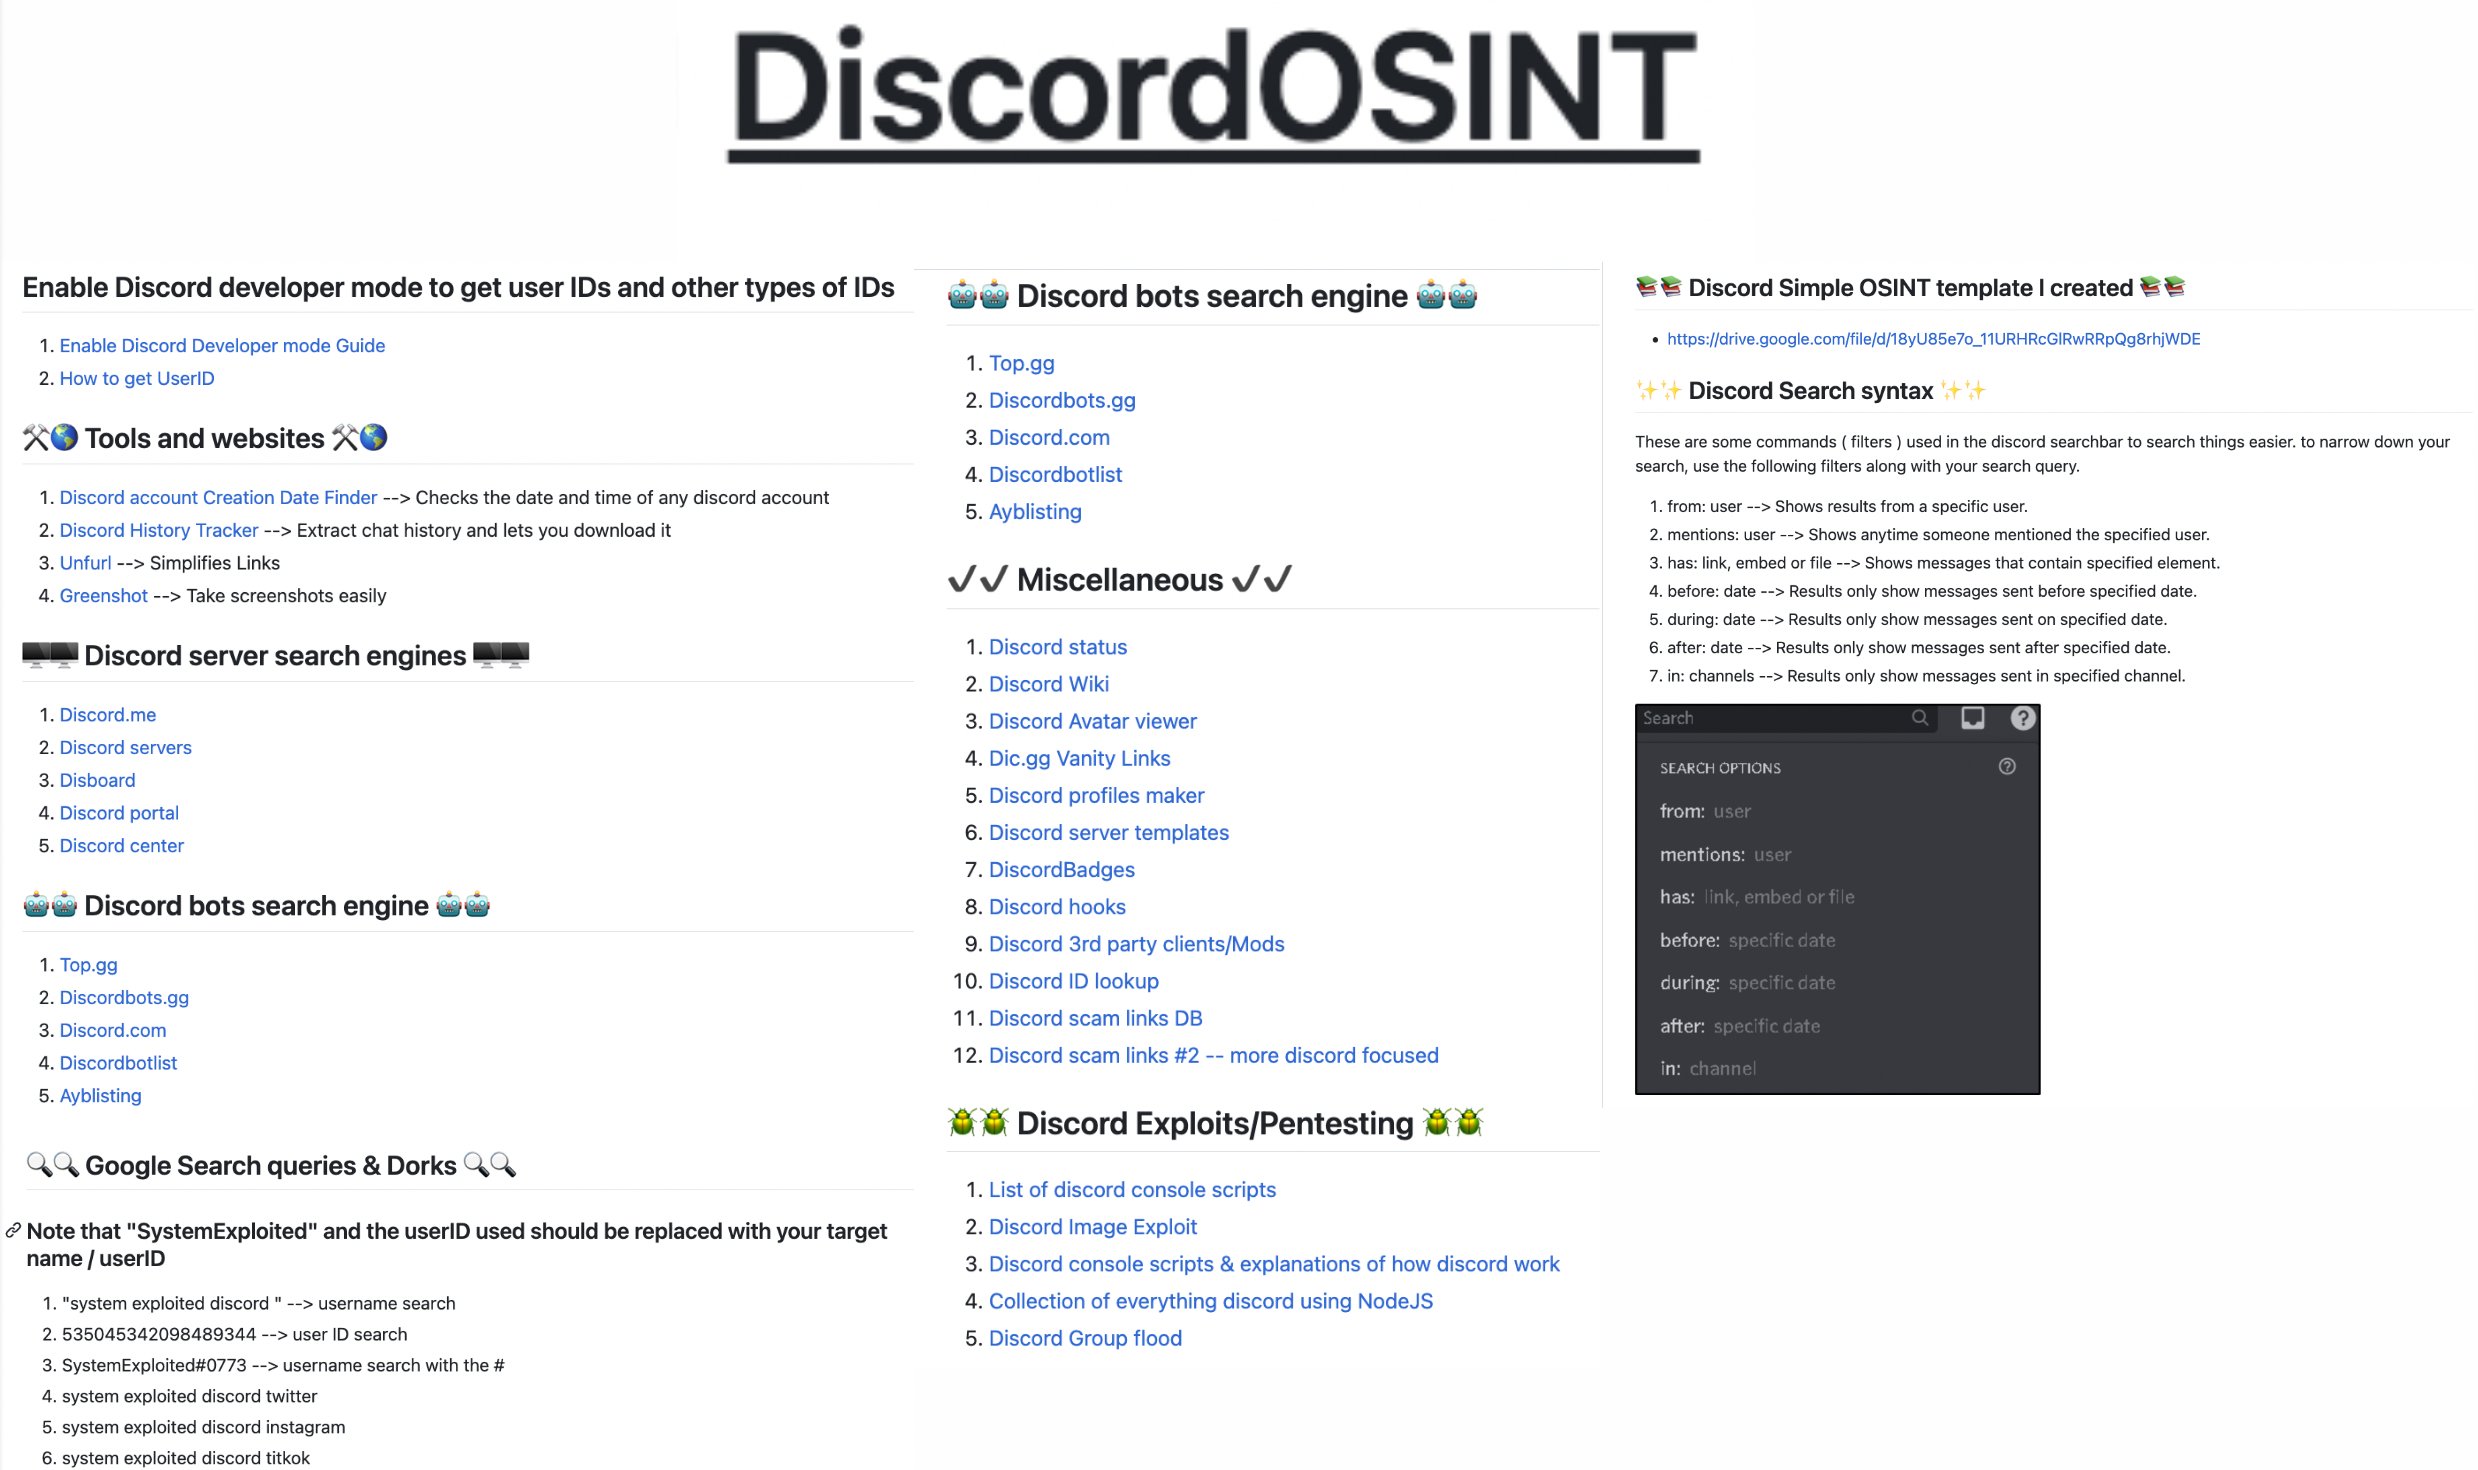 Cyber Detective💙💛 on X: DiscordOSINT Tools and websites Discord server  search engines Discord bots search engine Discord Exploits/Pentesting  Discord Search syntax Google Search queries & Dorks and more.   #osint #socmint https